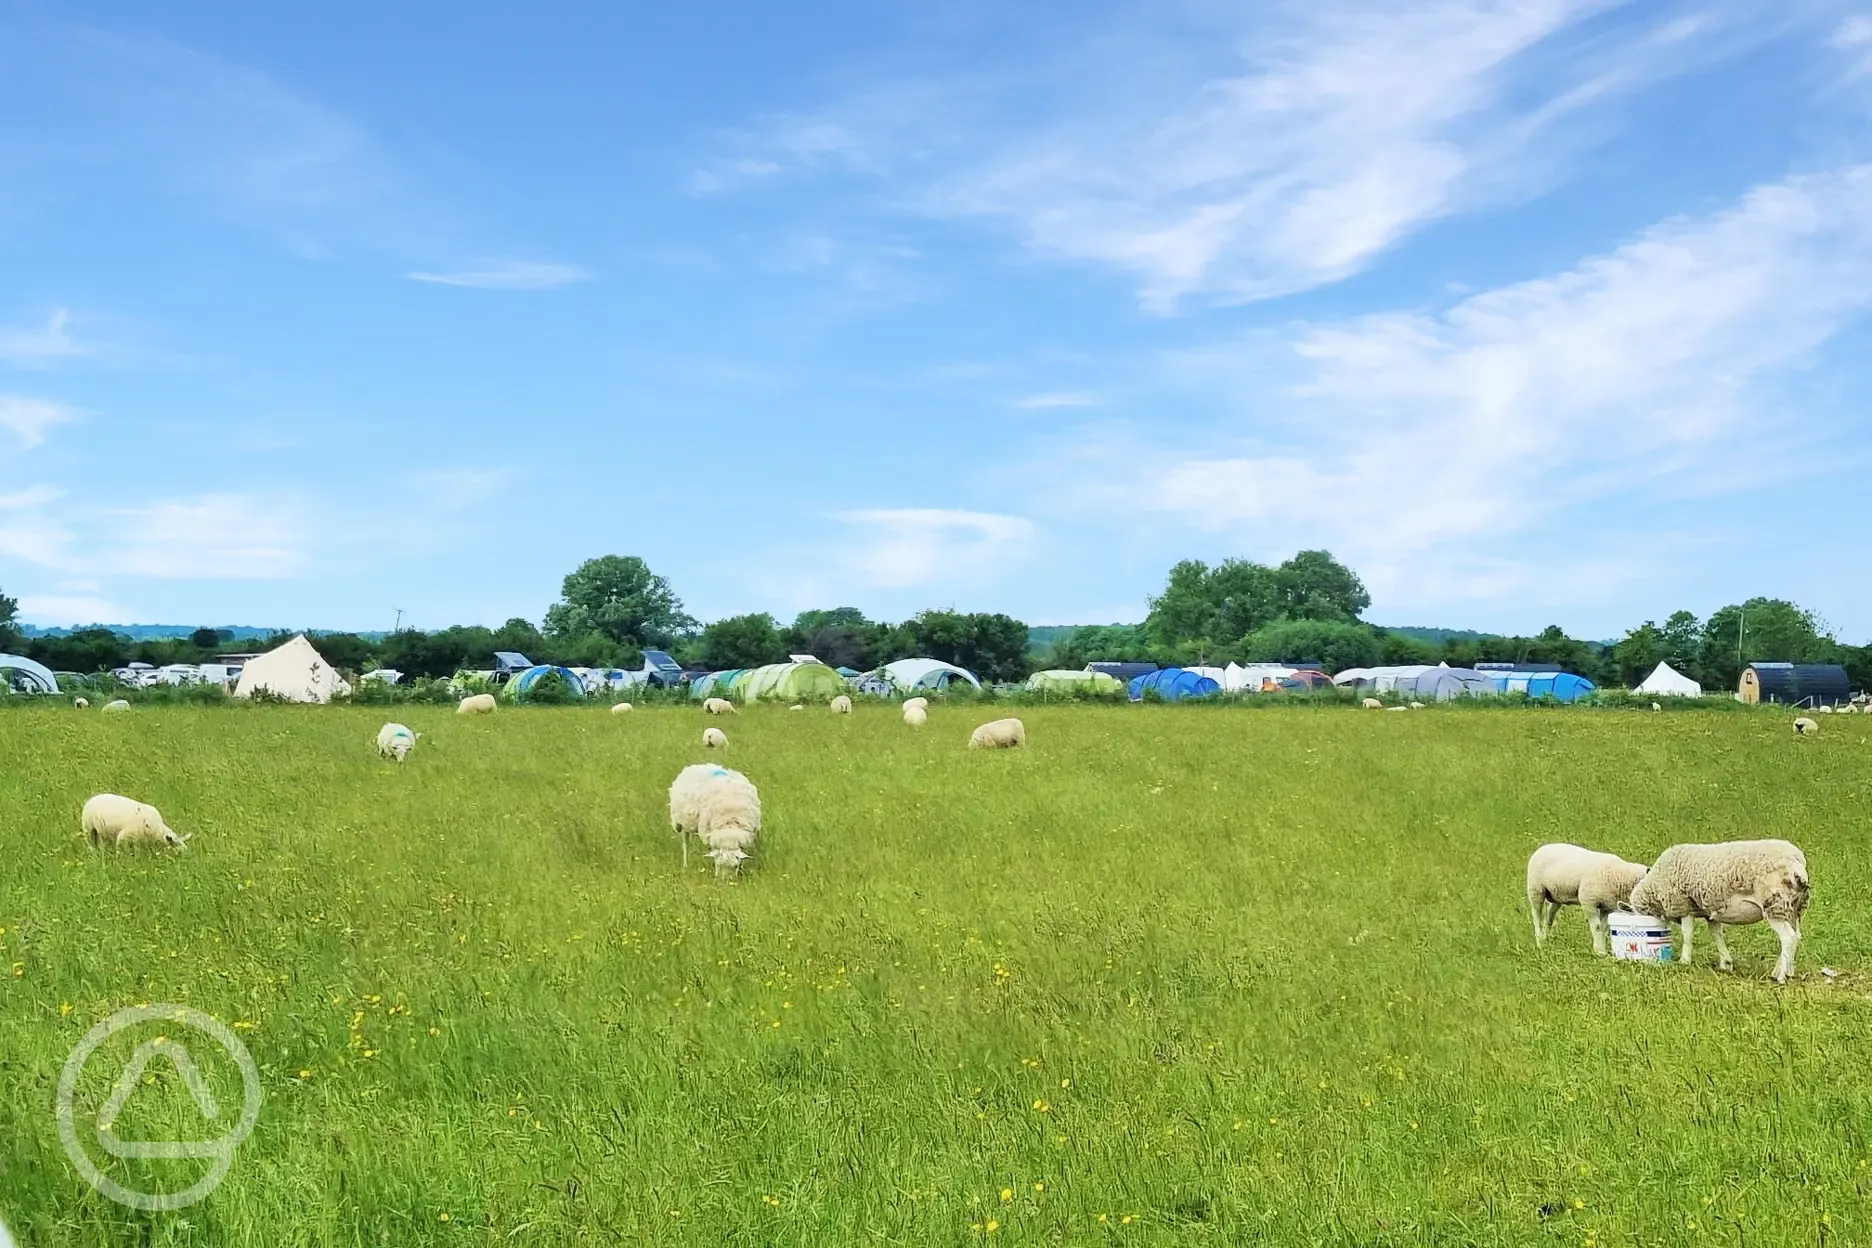 Camping field and onsite sheep